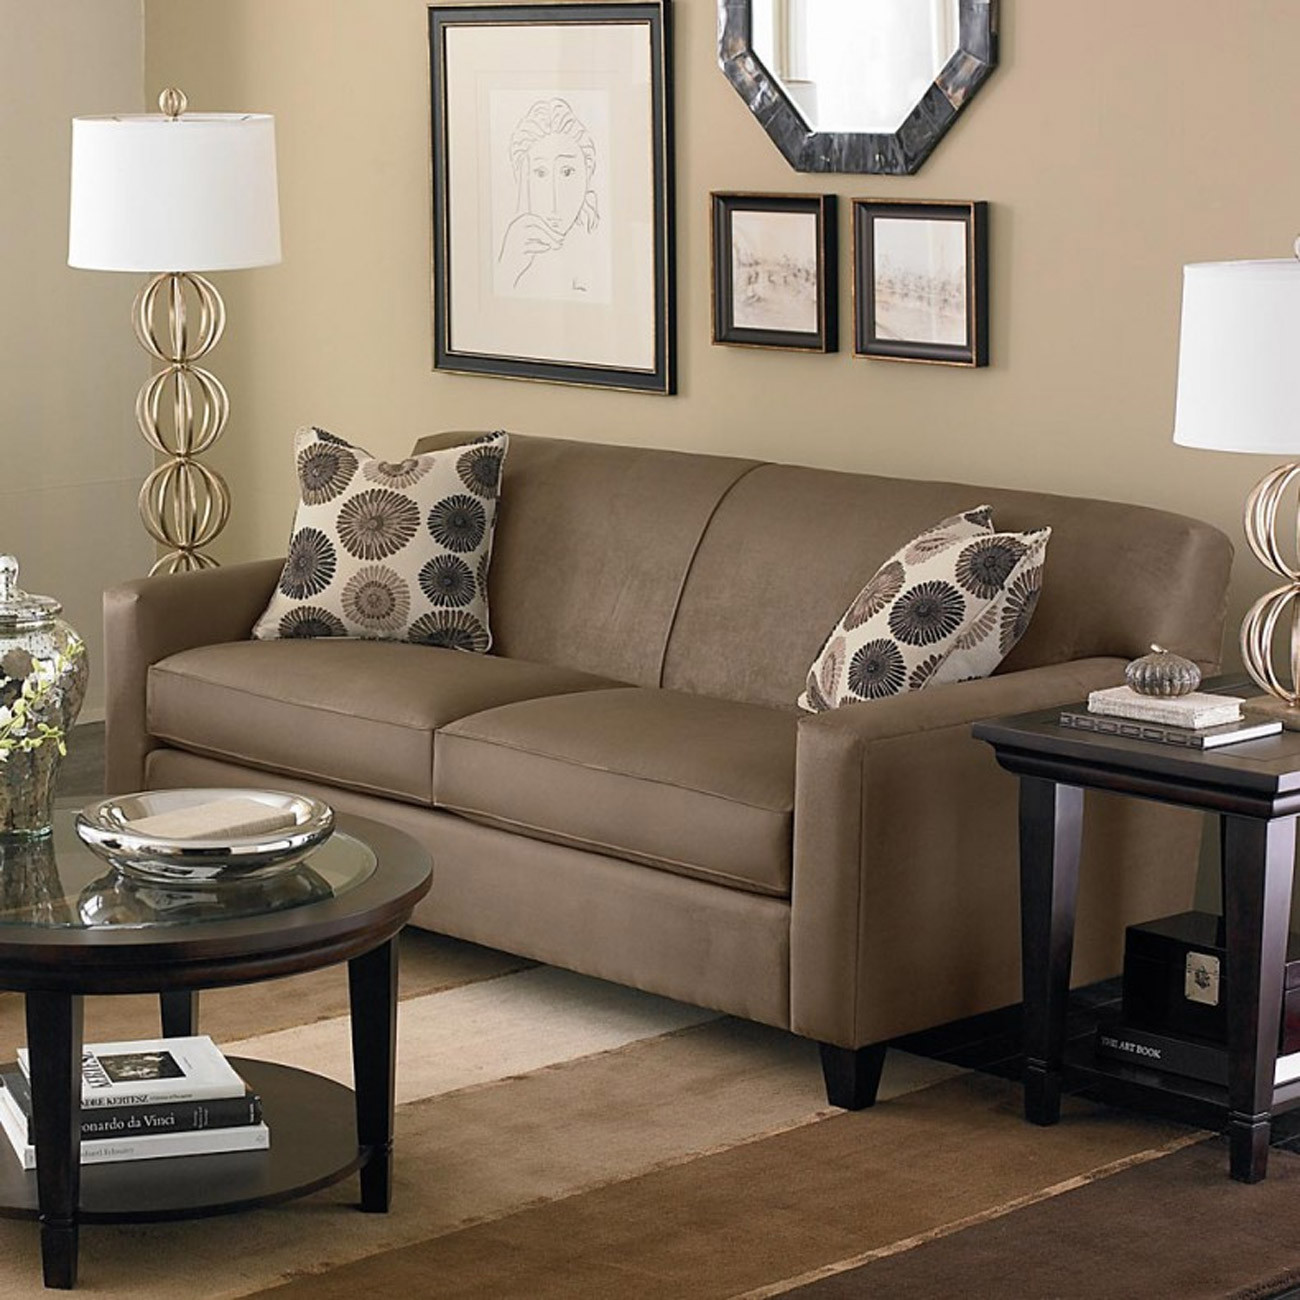 Furniture For Small Living Rooms
 Find Suitable Living Room Furniture With Your Style